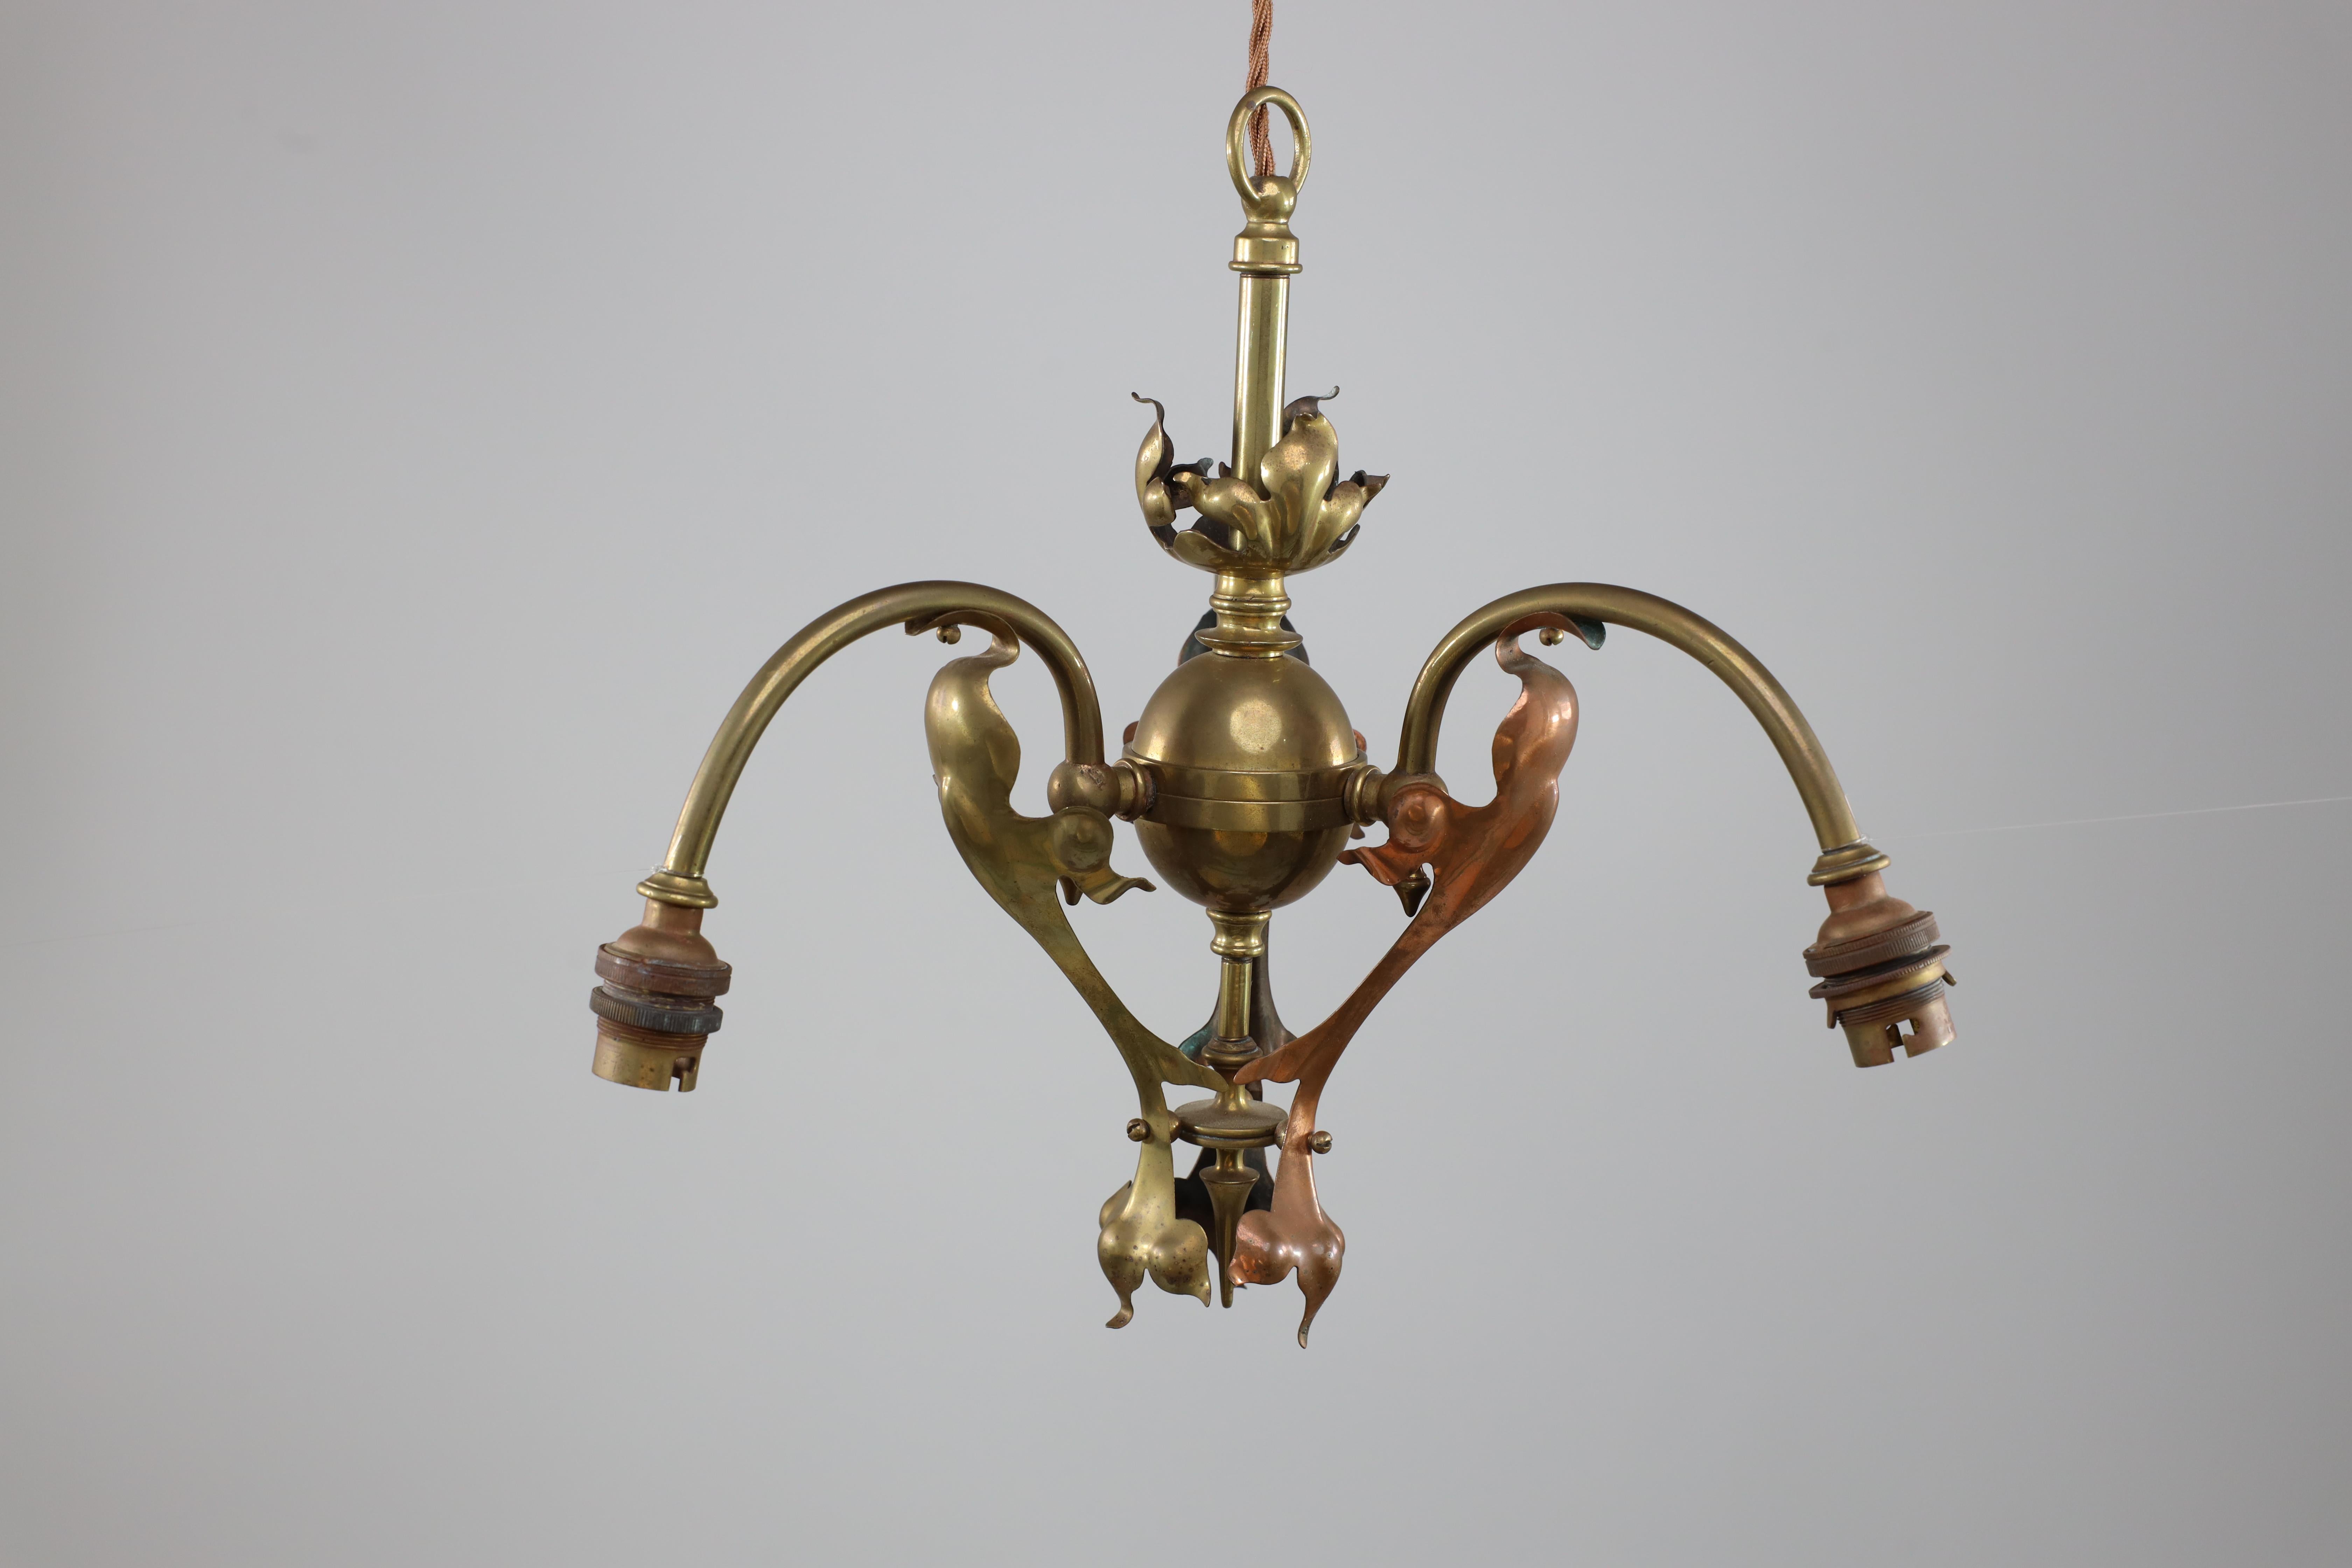 An Arts and Crafts brass three arm ceiling light with a flower bud to the top and pierced leaf decoration to the arms. We have original brass chain to hang this at any height.